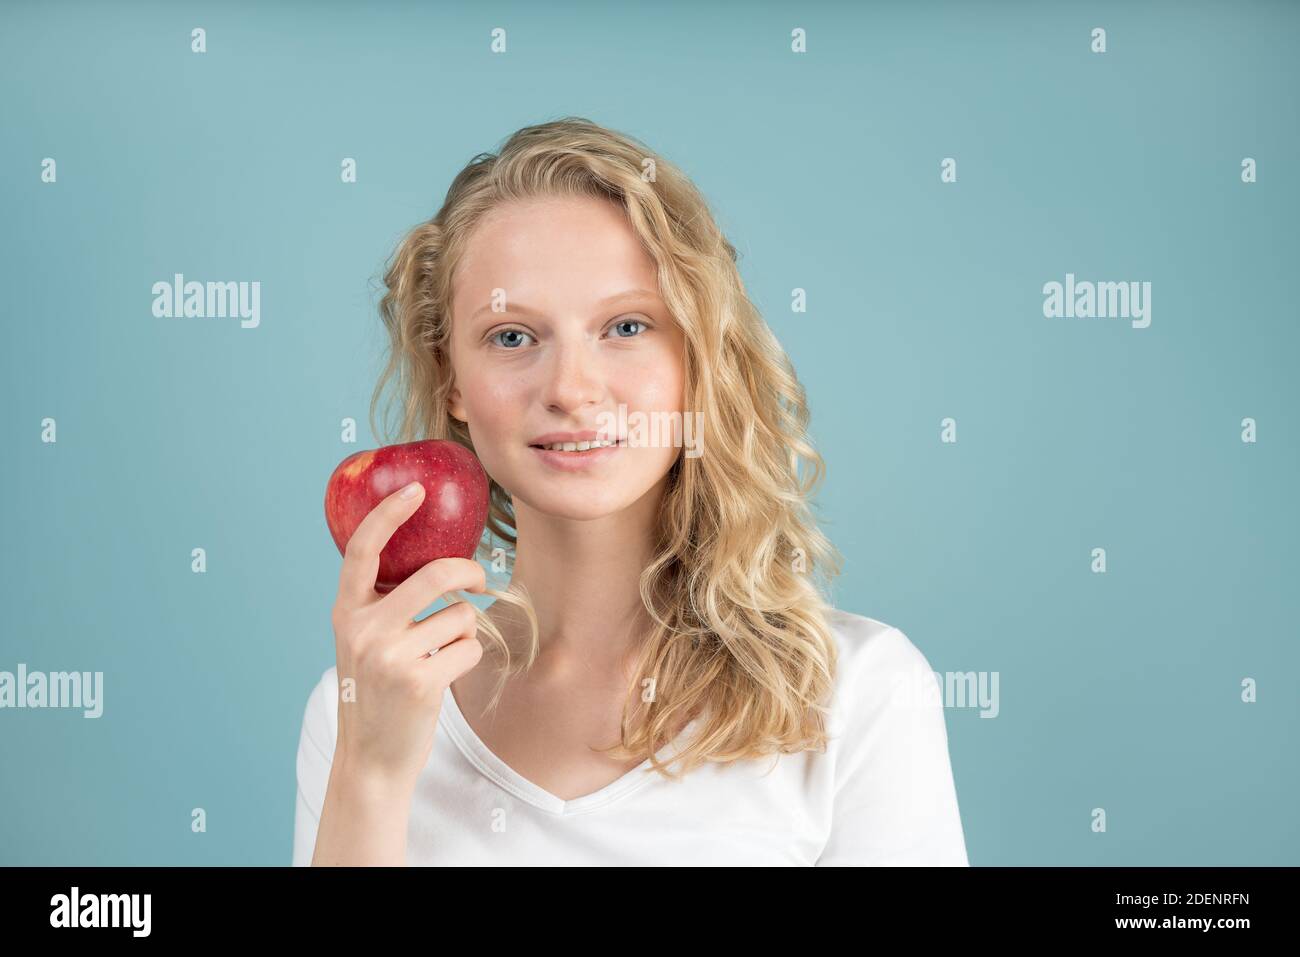 Portrait of young smiling woman with red apple. Fresh face, natural beauty Stock Photo